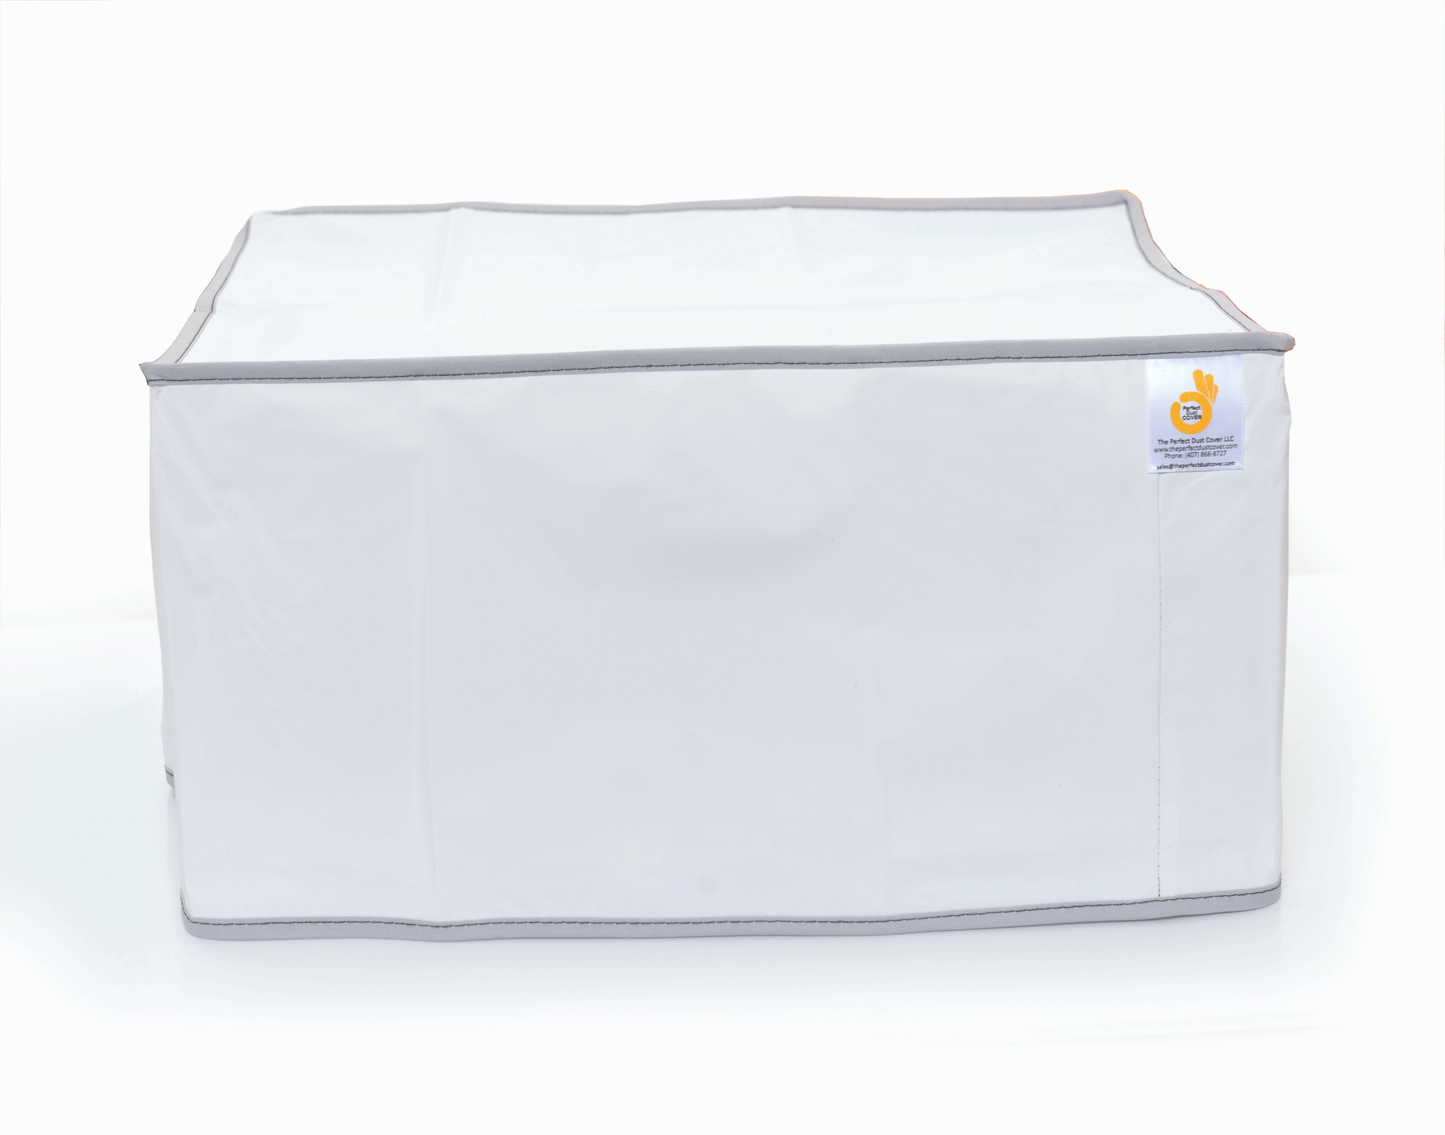 The Perfect Dust Cover, White Nylon Cover Compatible with Canon Pixma TS302a Wireless Printer, Anti Static, Double Stitched and Waterproof Dust Cover Dimensions 17''W x 11.1''D x 5.7''H by Perfect Dust Cover LLC